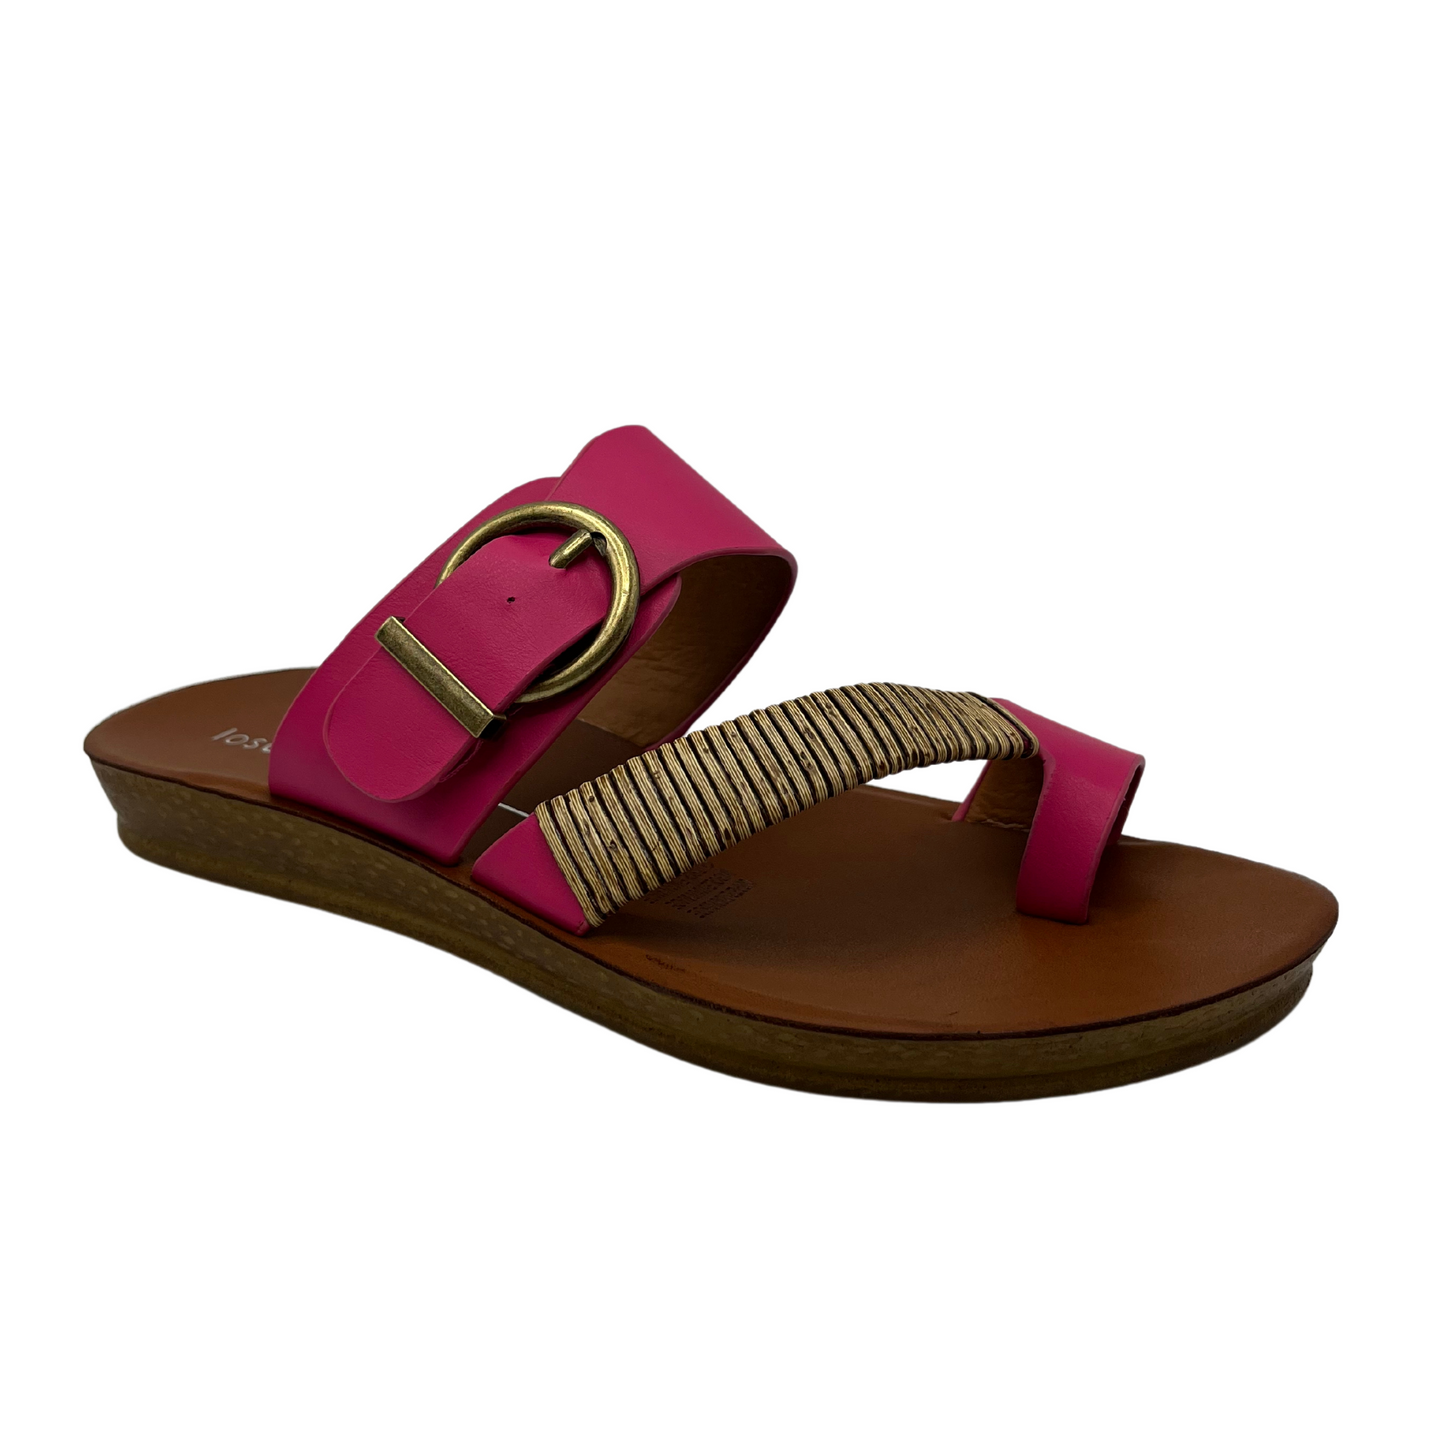 45 degree angled view of fuchsia leather sandal with gold buckle and brown insole